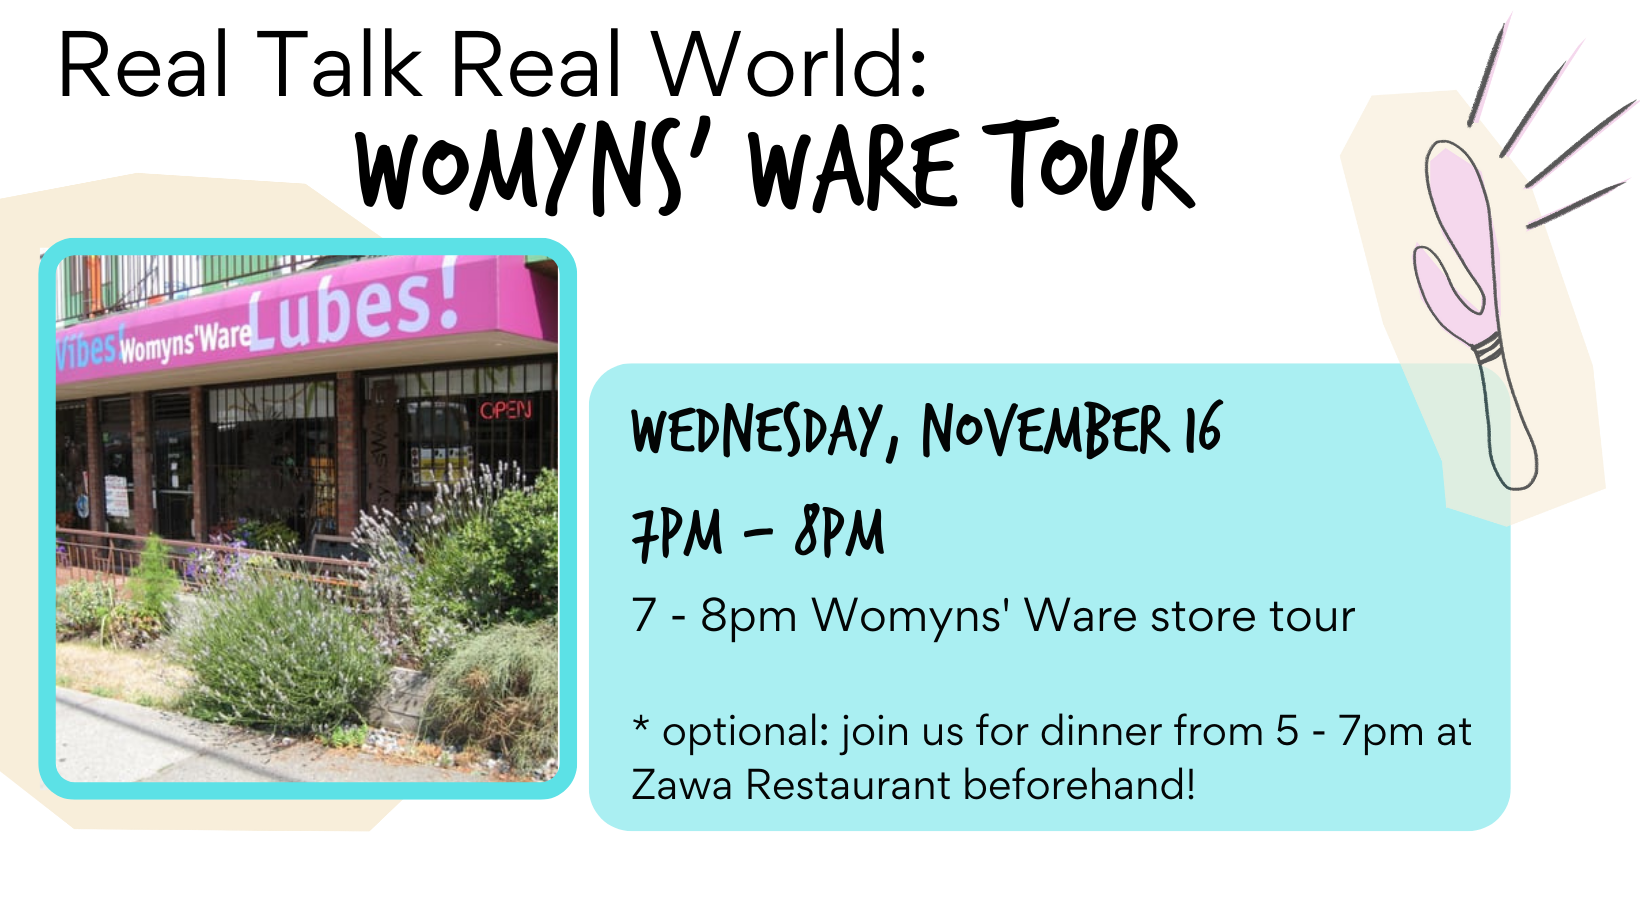 Real Talk, Real World: Womyns’ Ware Tour (All Genders Welcome)